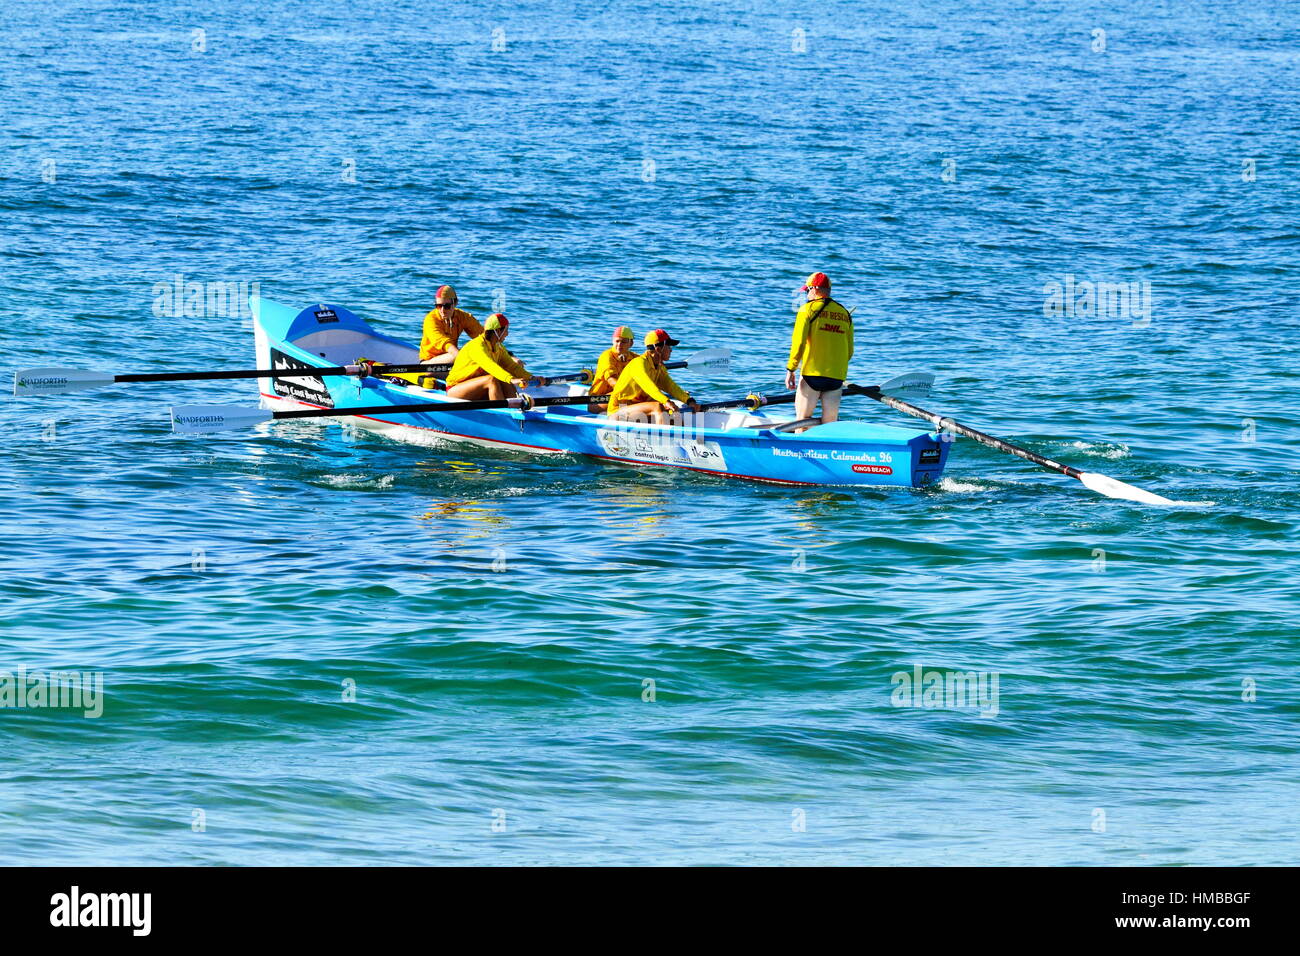 Five Surf Lifesavers launching a surf boat for some training at Kings Beach on the Sunshine Coast of Queensland, Australia. Stock Photo